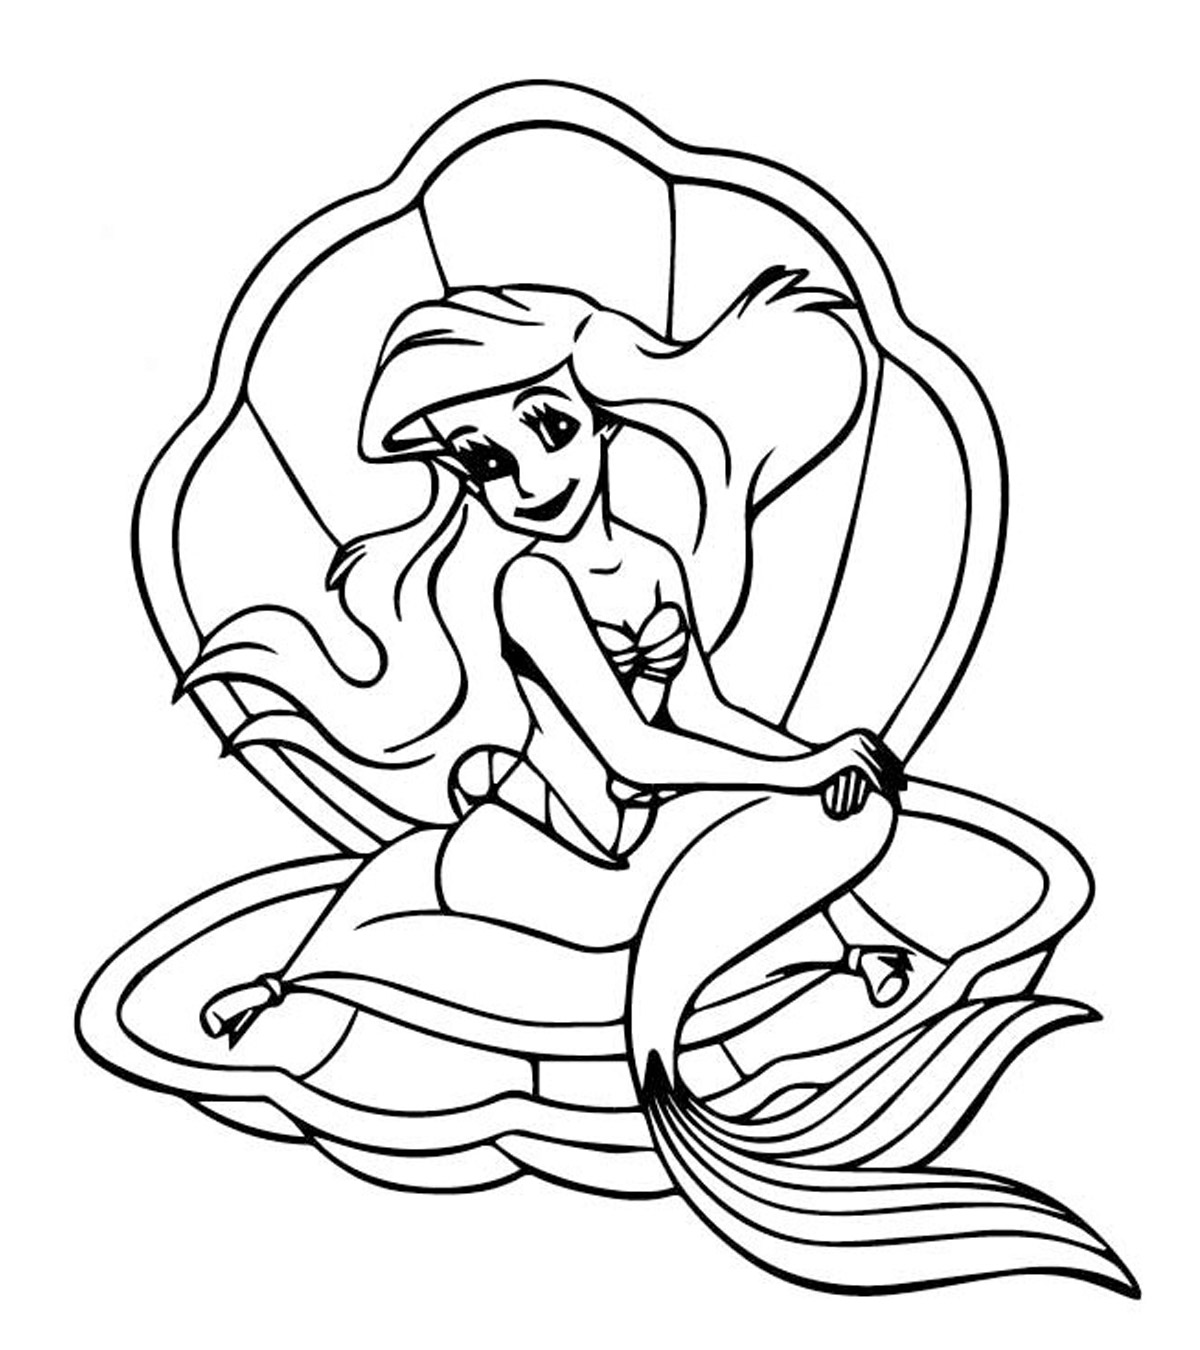 25 Amazing Little Mermaid Coloring Pages For Your Little Ones